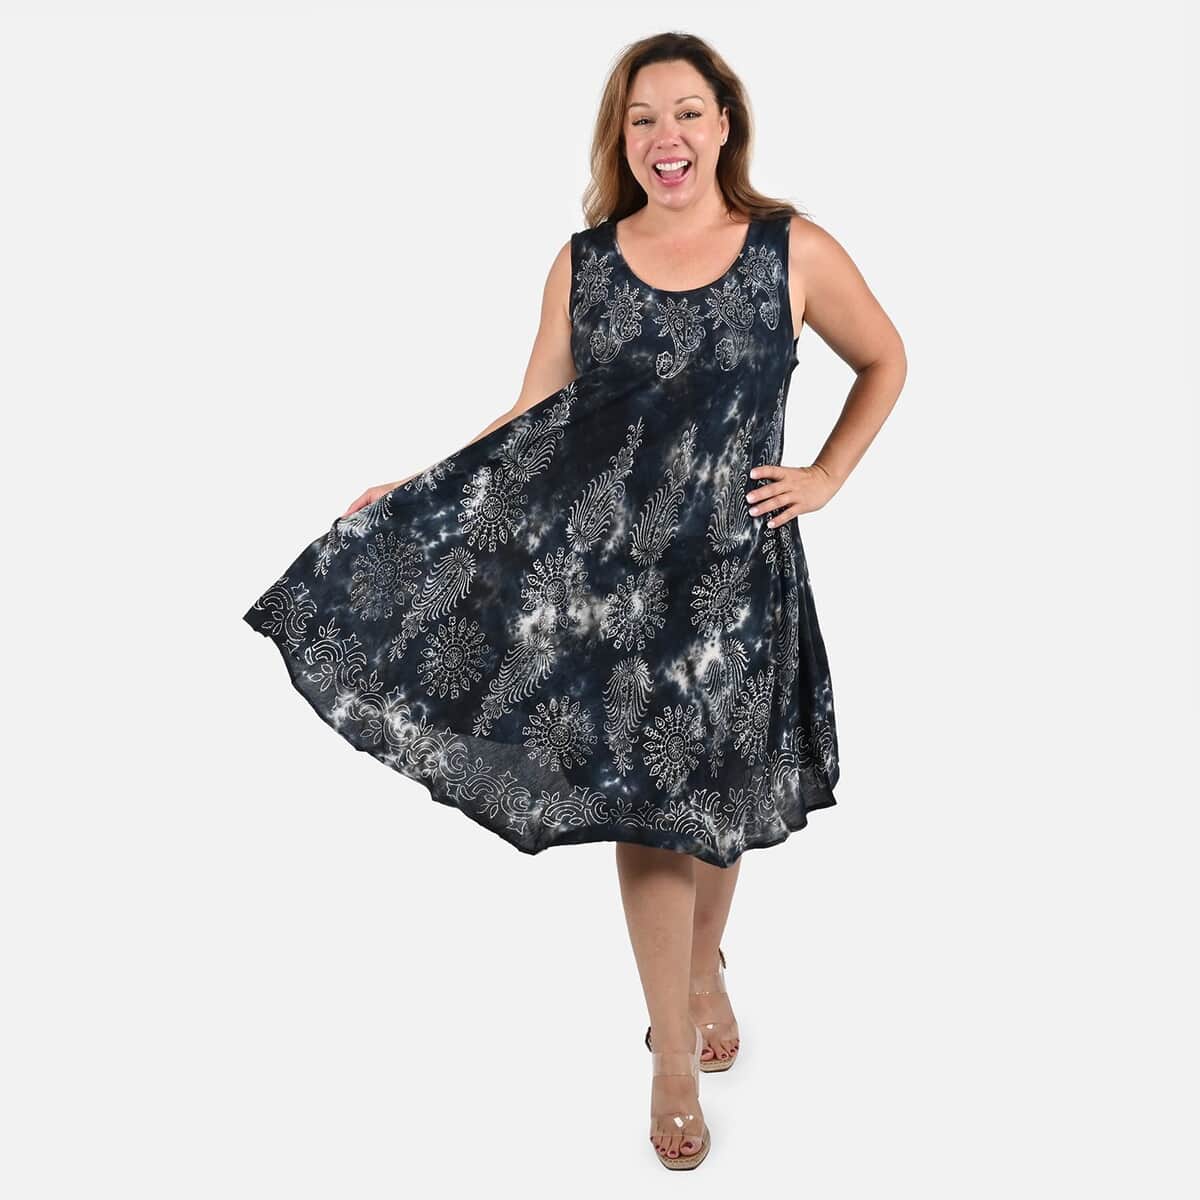 Tamsy Black and White Tie Dye Print Umbrella Dress (One Size Plus) image number 0